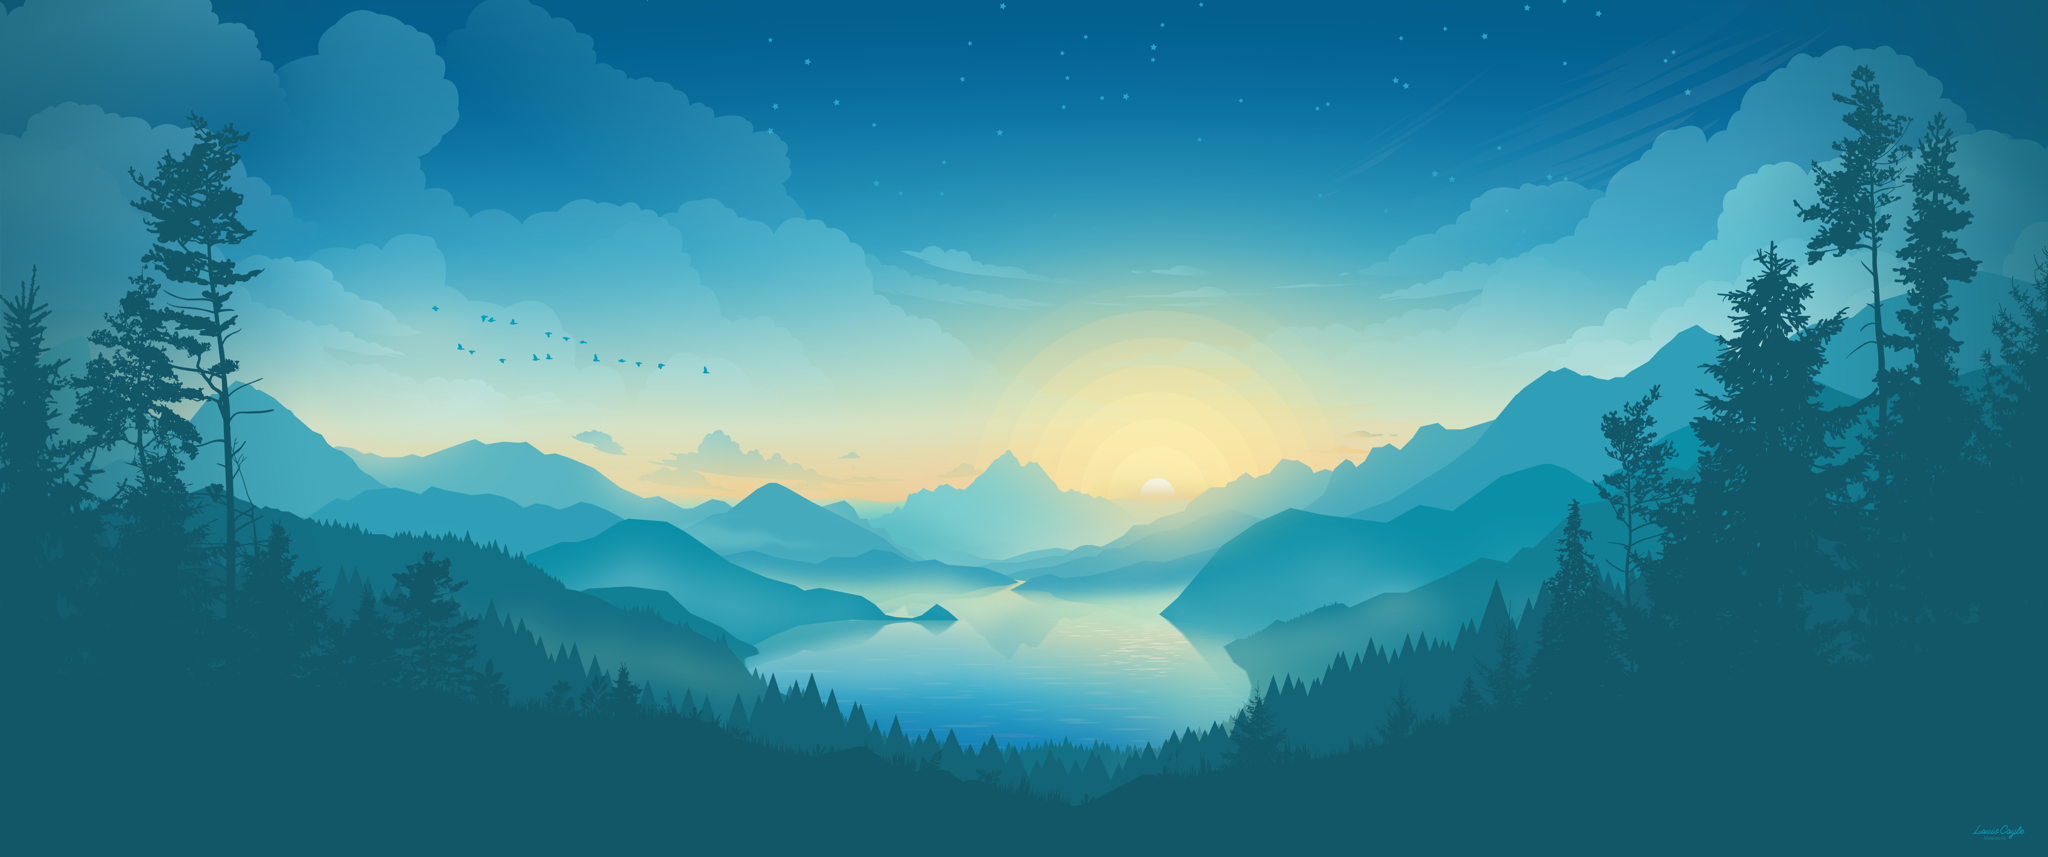 Firewatch Live Wallpaper 4K Upscale by FortuN on Make a GIF